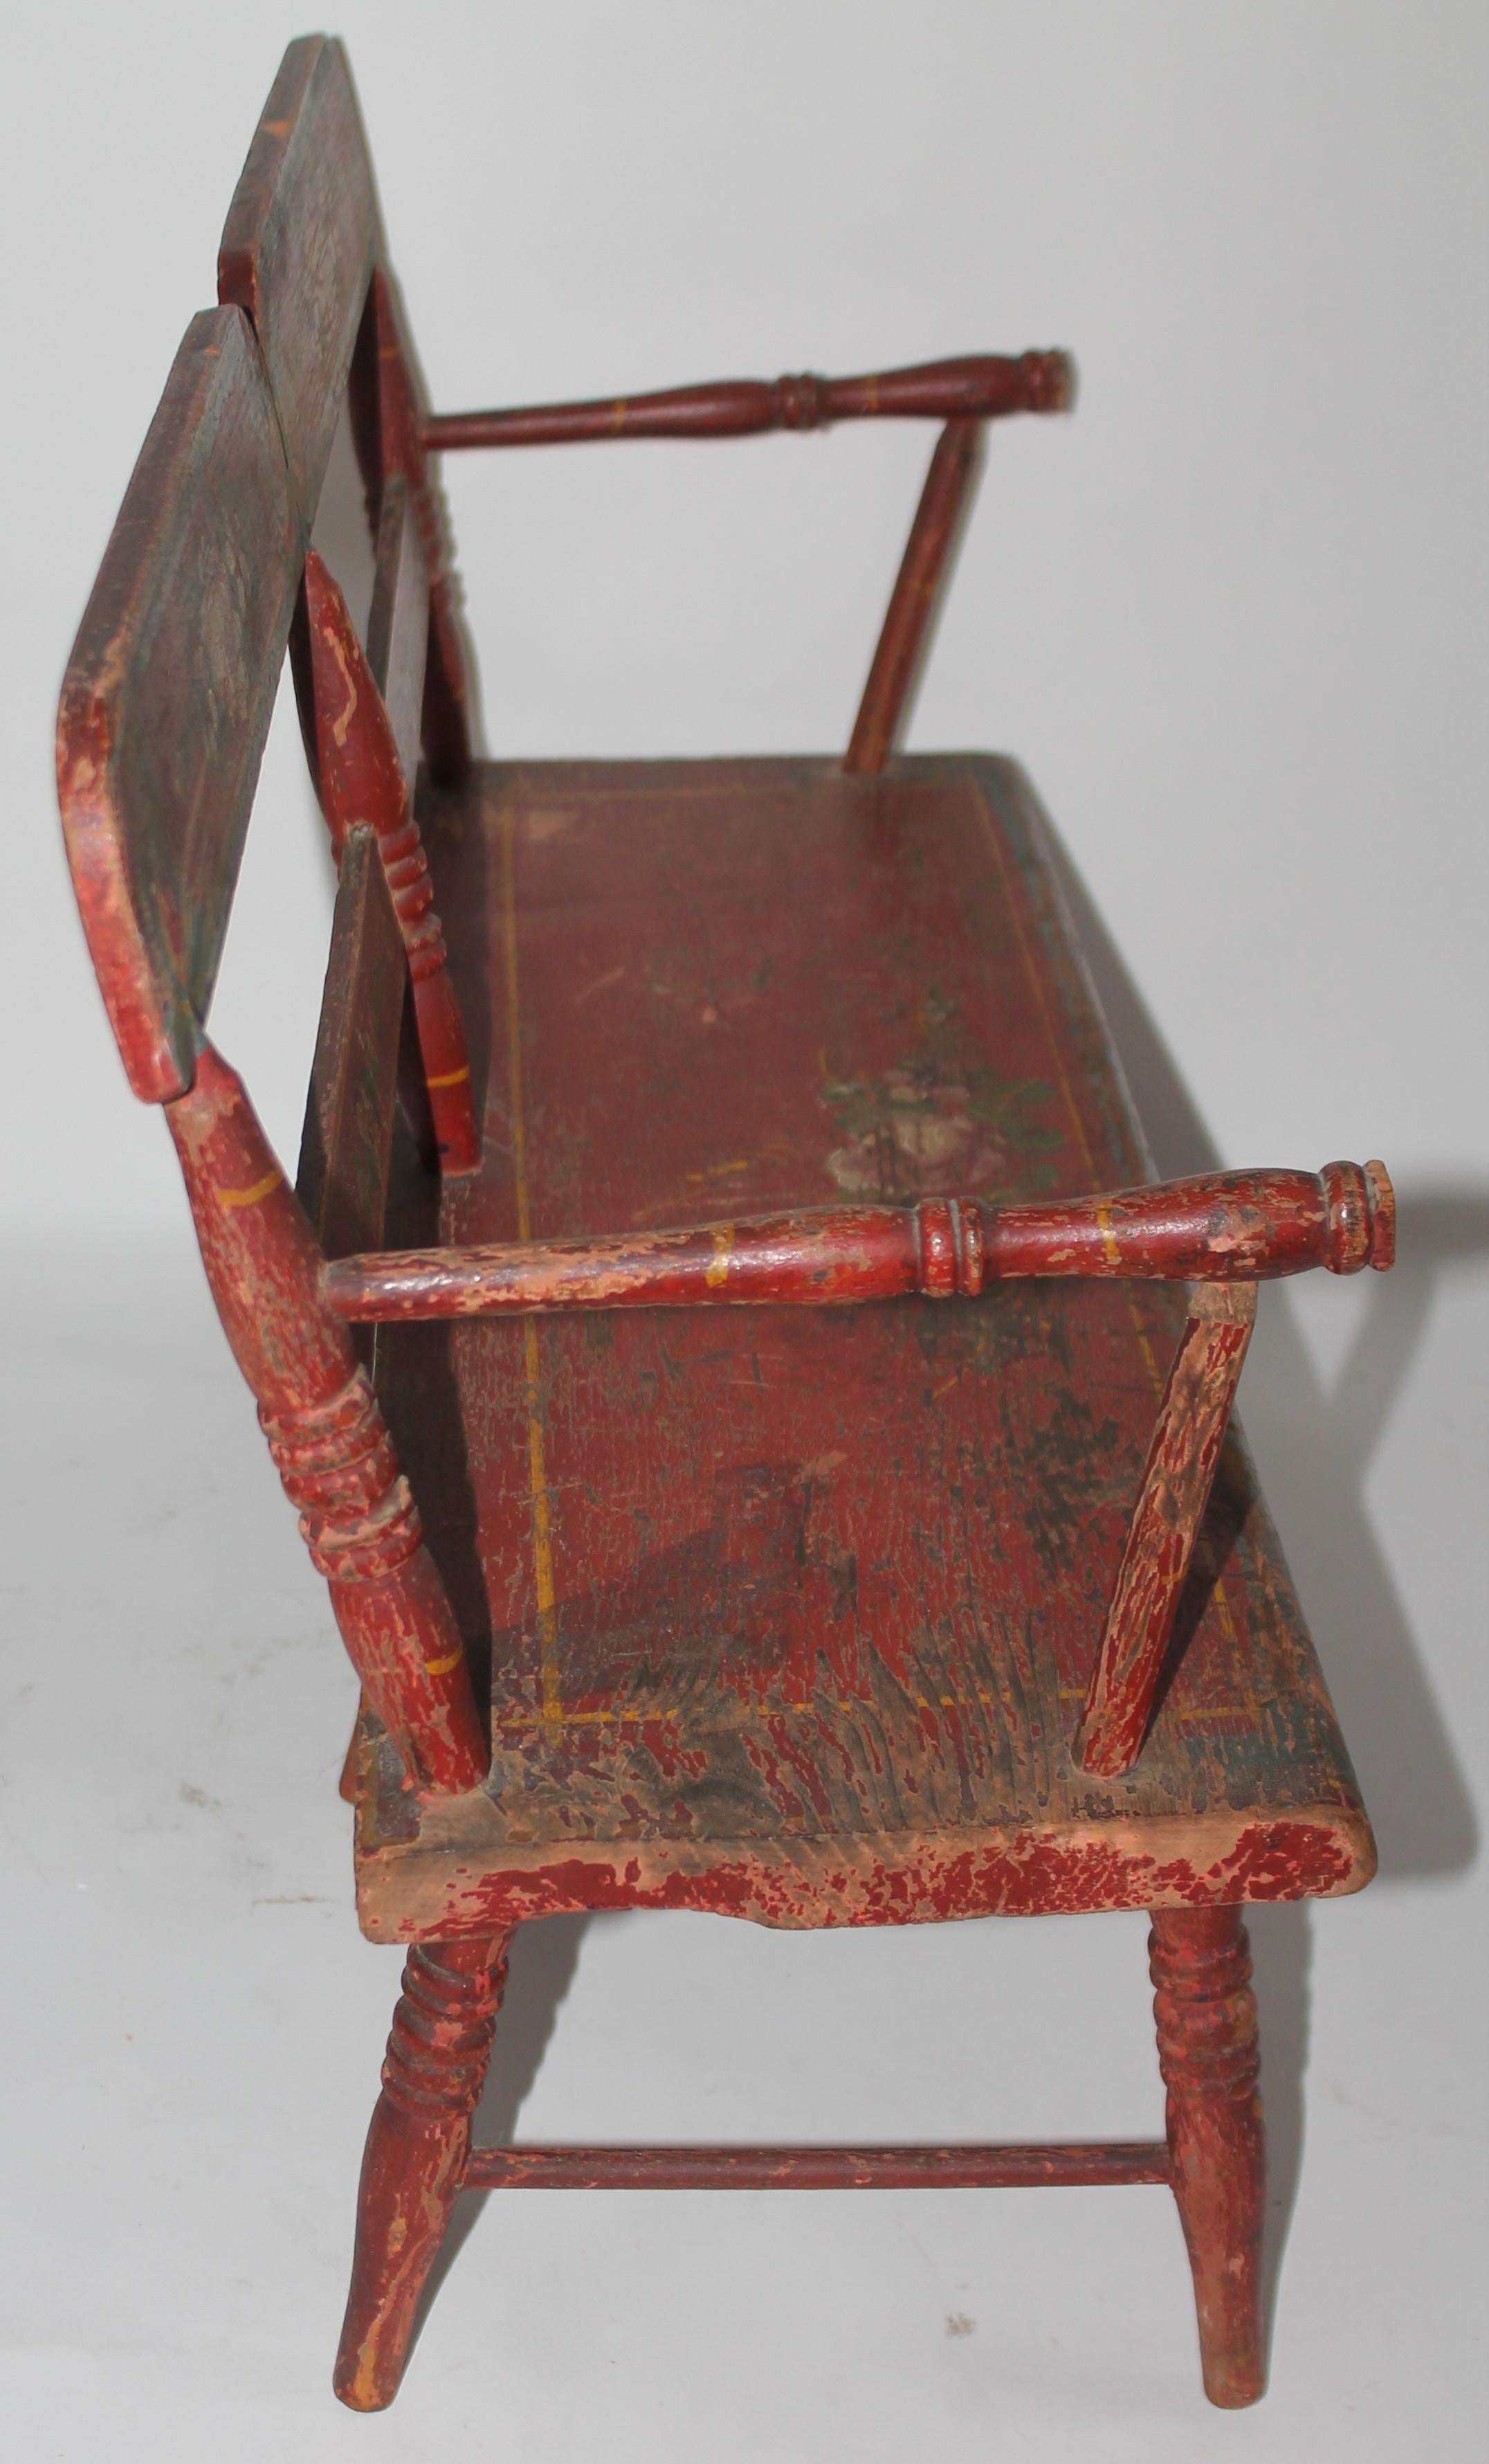 19thc original paint decorated Lancaster county Miniature Settee. Great for a doll or teddy bear collection. Or just setting on a blanket chest in a folk art collection.